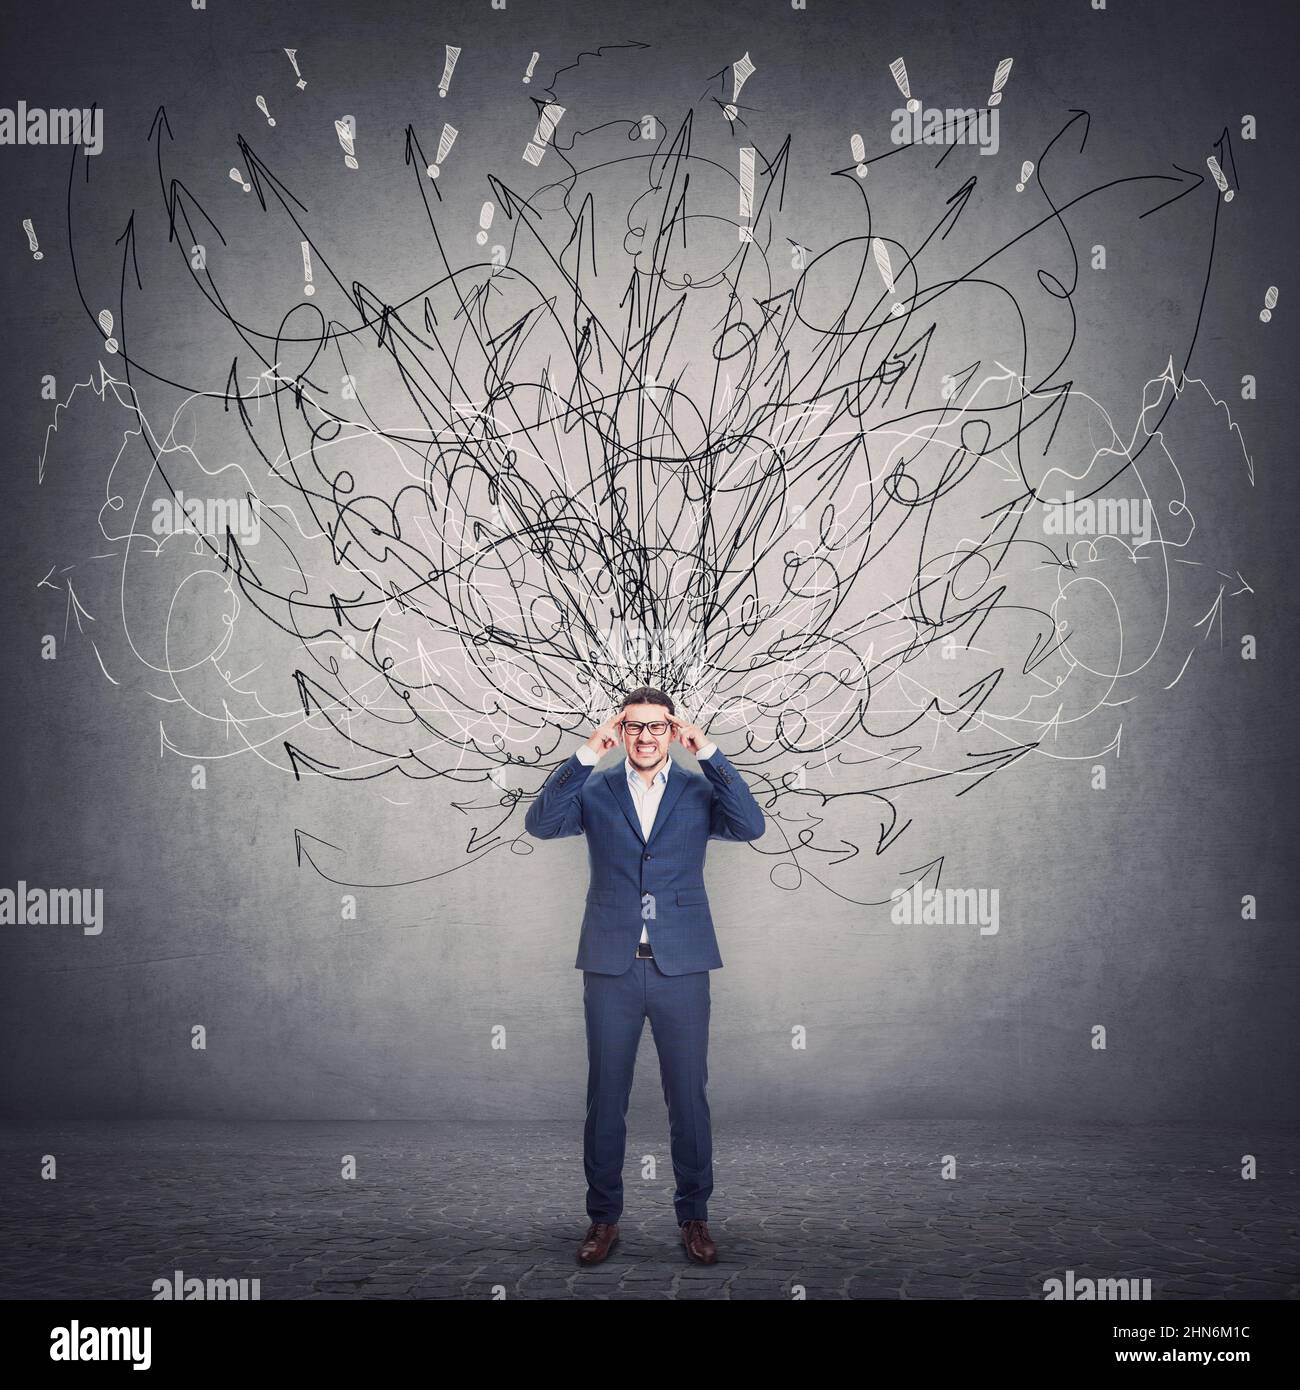 Businessman focusing on a difficult task, hard thinking concept with mess sketches coming out of the person head. Anxiety and mental health problems Stock Photo